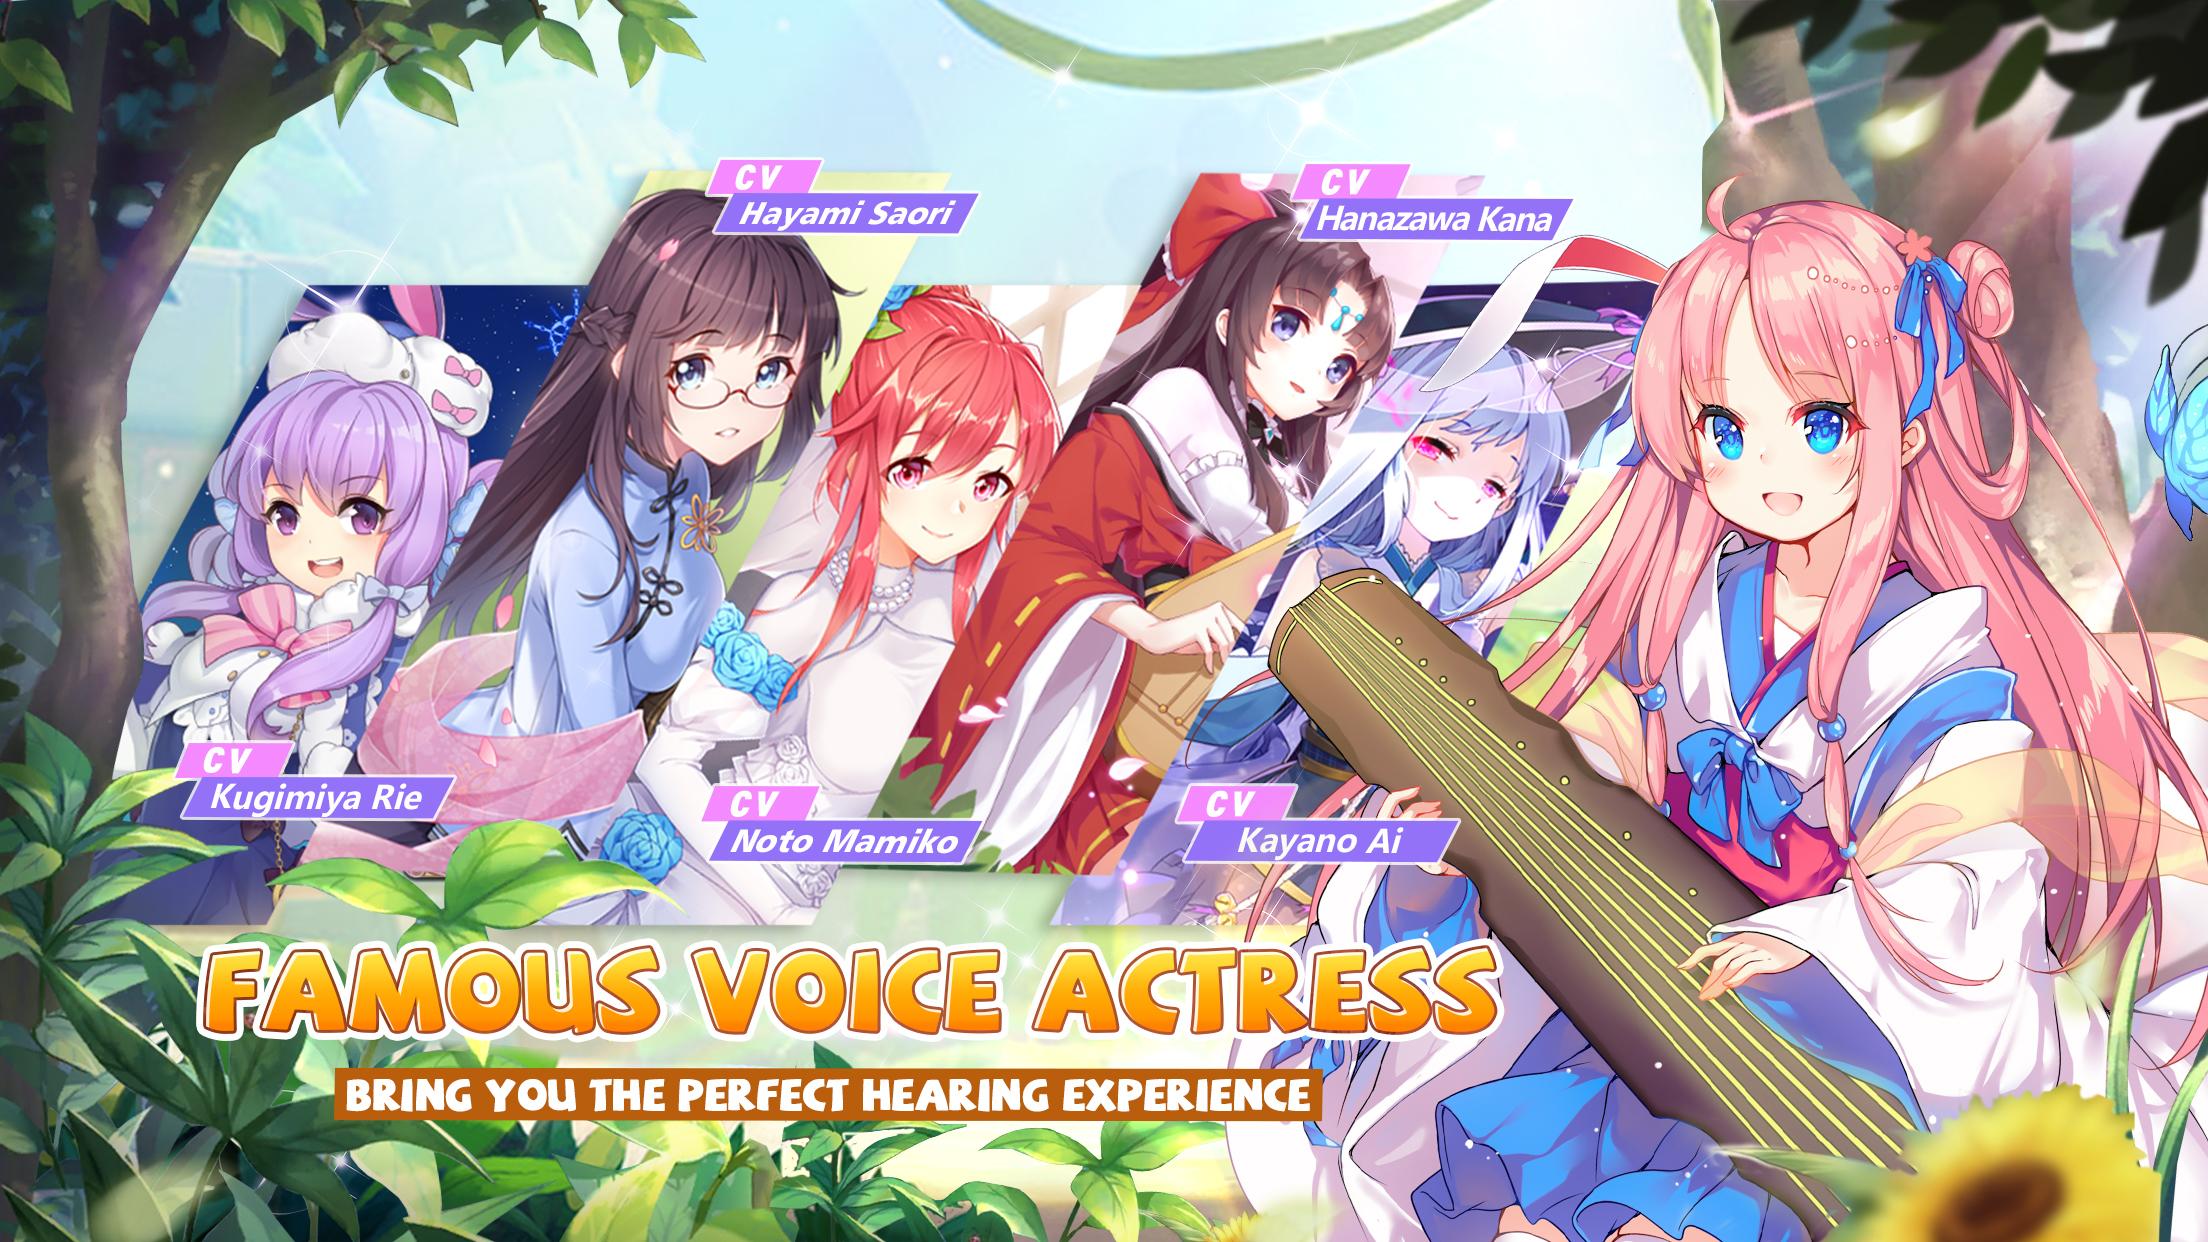 Girls X Battle 2 for Android - APK Download - 